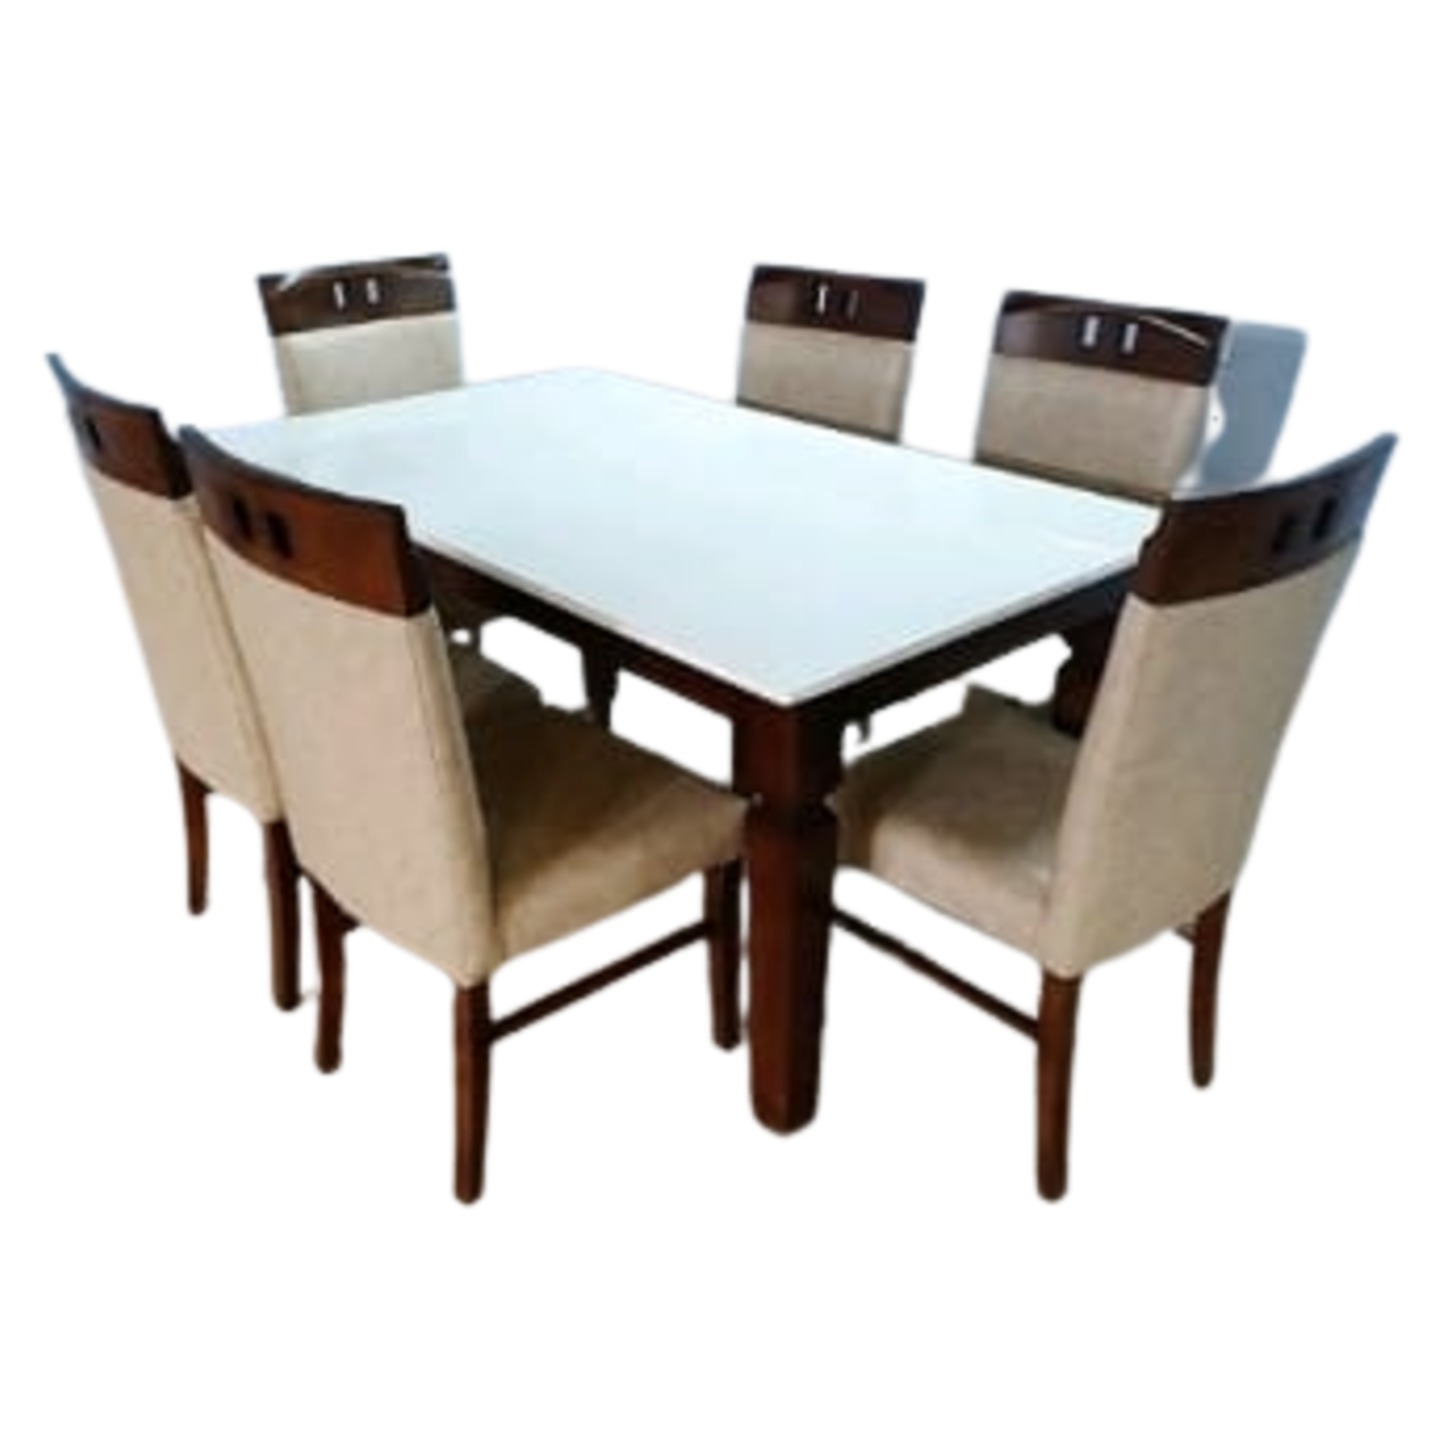 DW Marble Top H-001  Six Seater Dining Table Set in Brown Colour